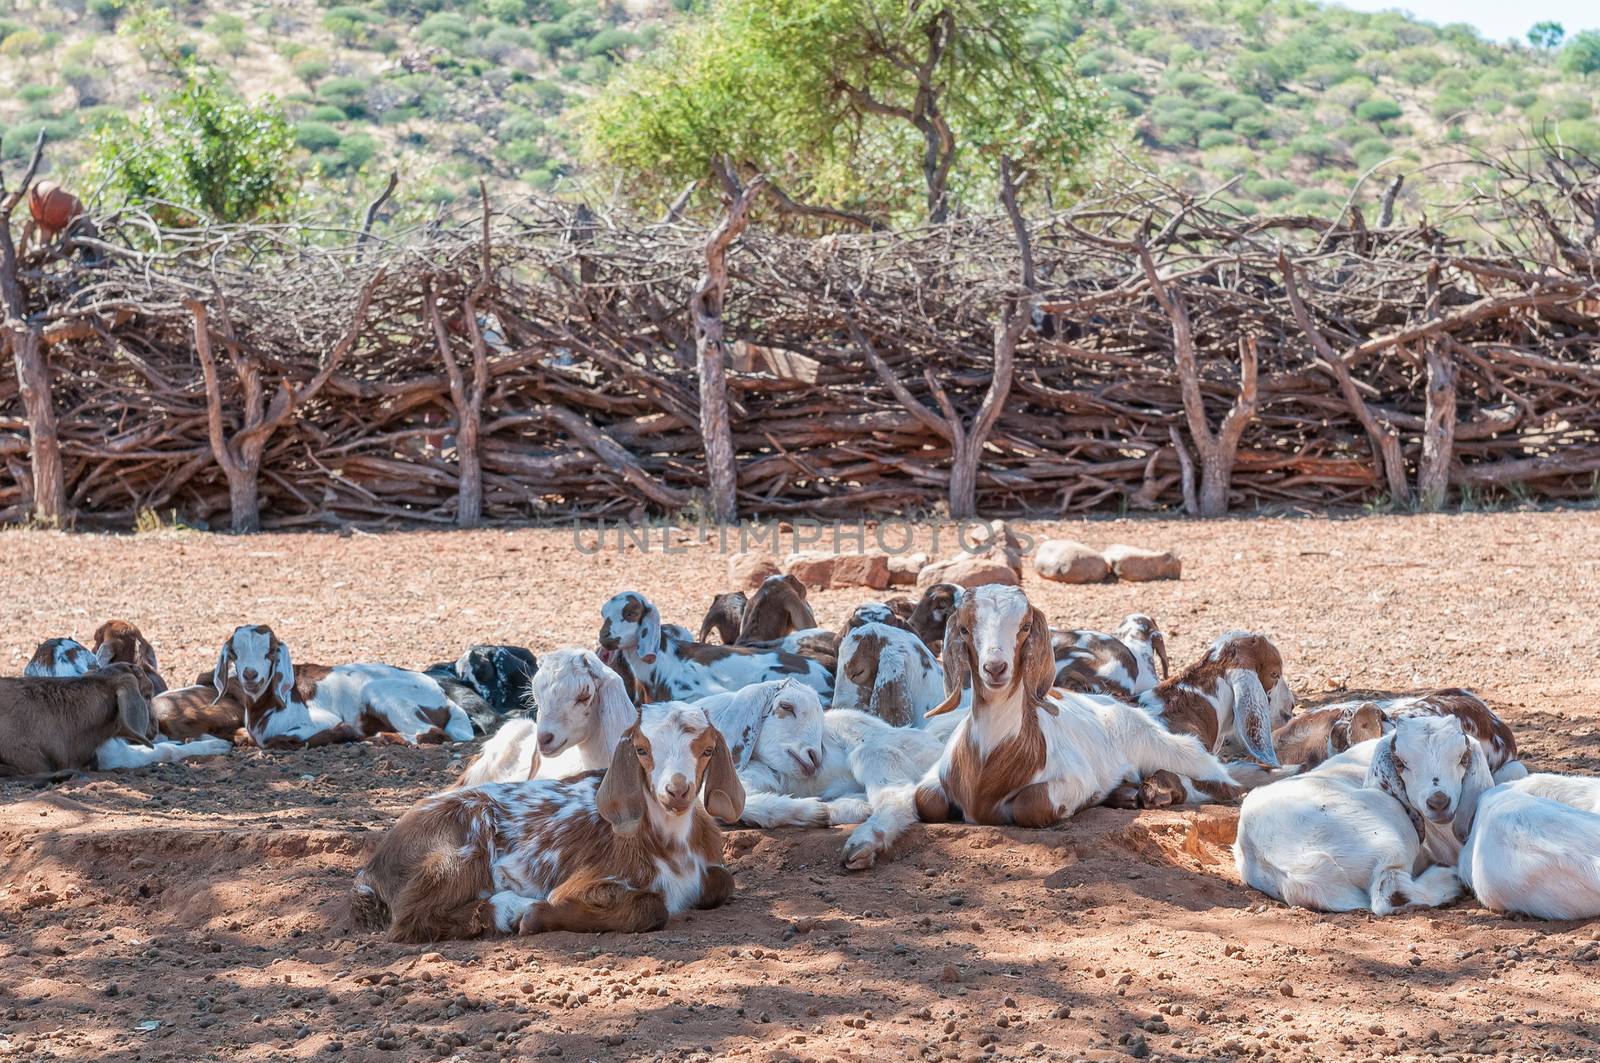 Goats in the shade of a tree in Himba village by dpreezg